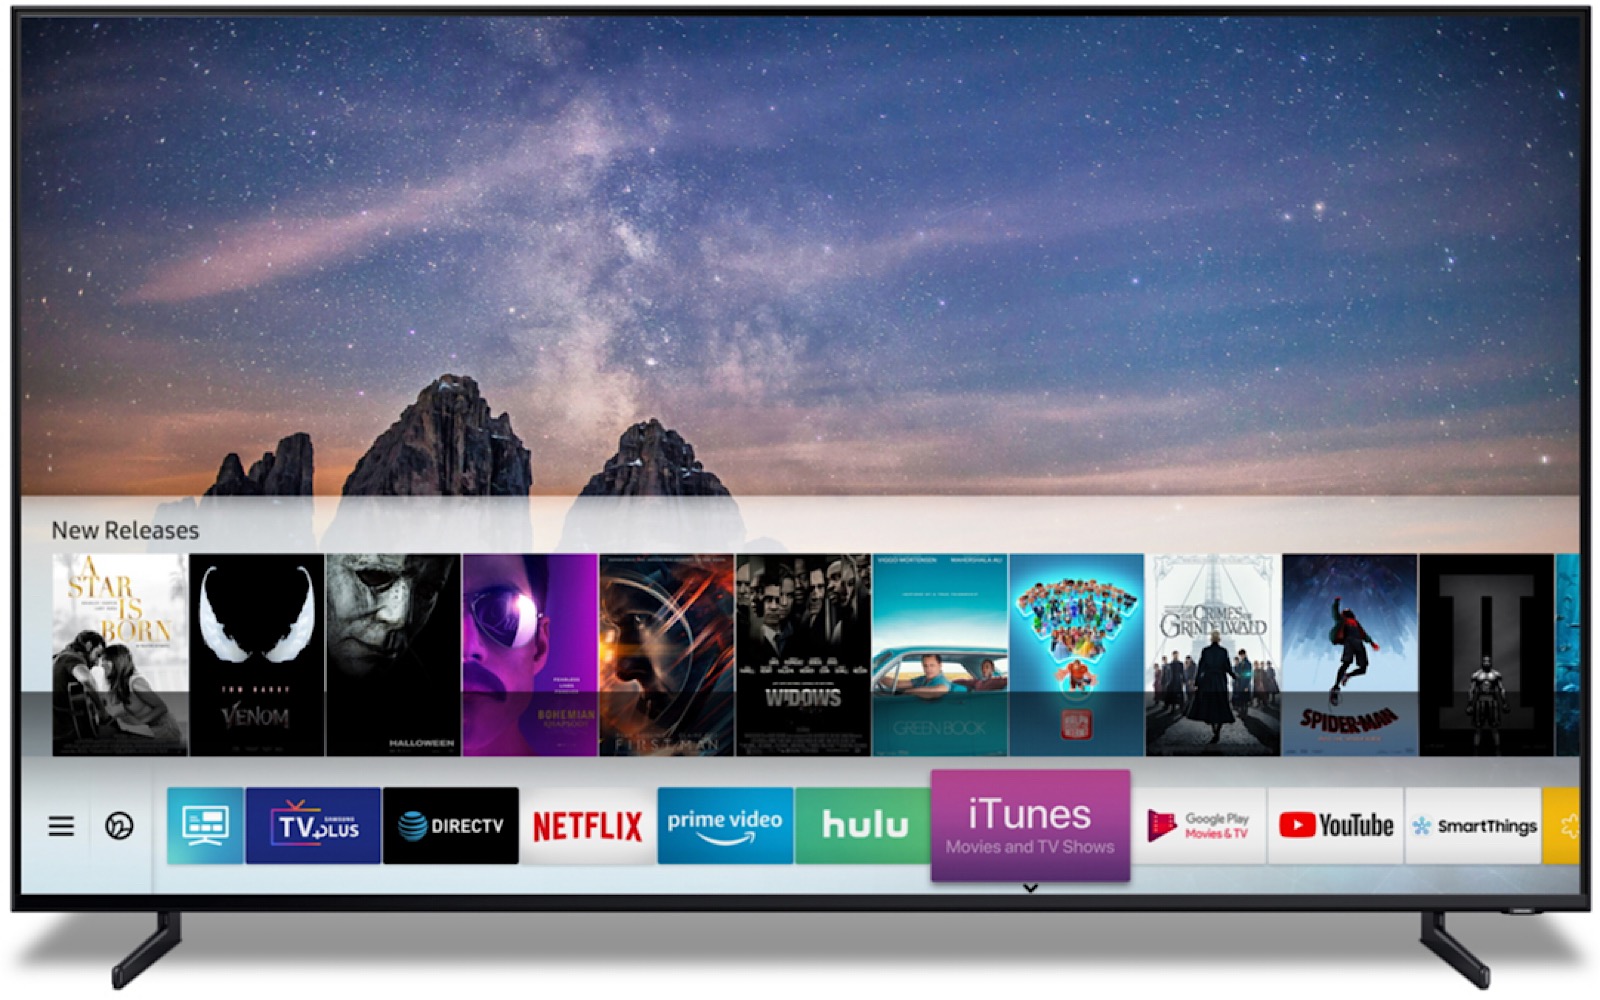 Samsung's iTunes Movies & TV Shows app for Samsung 2018 and 2019 TVs